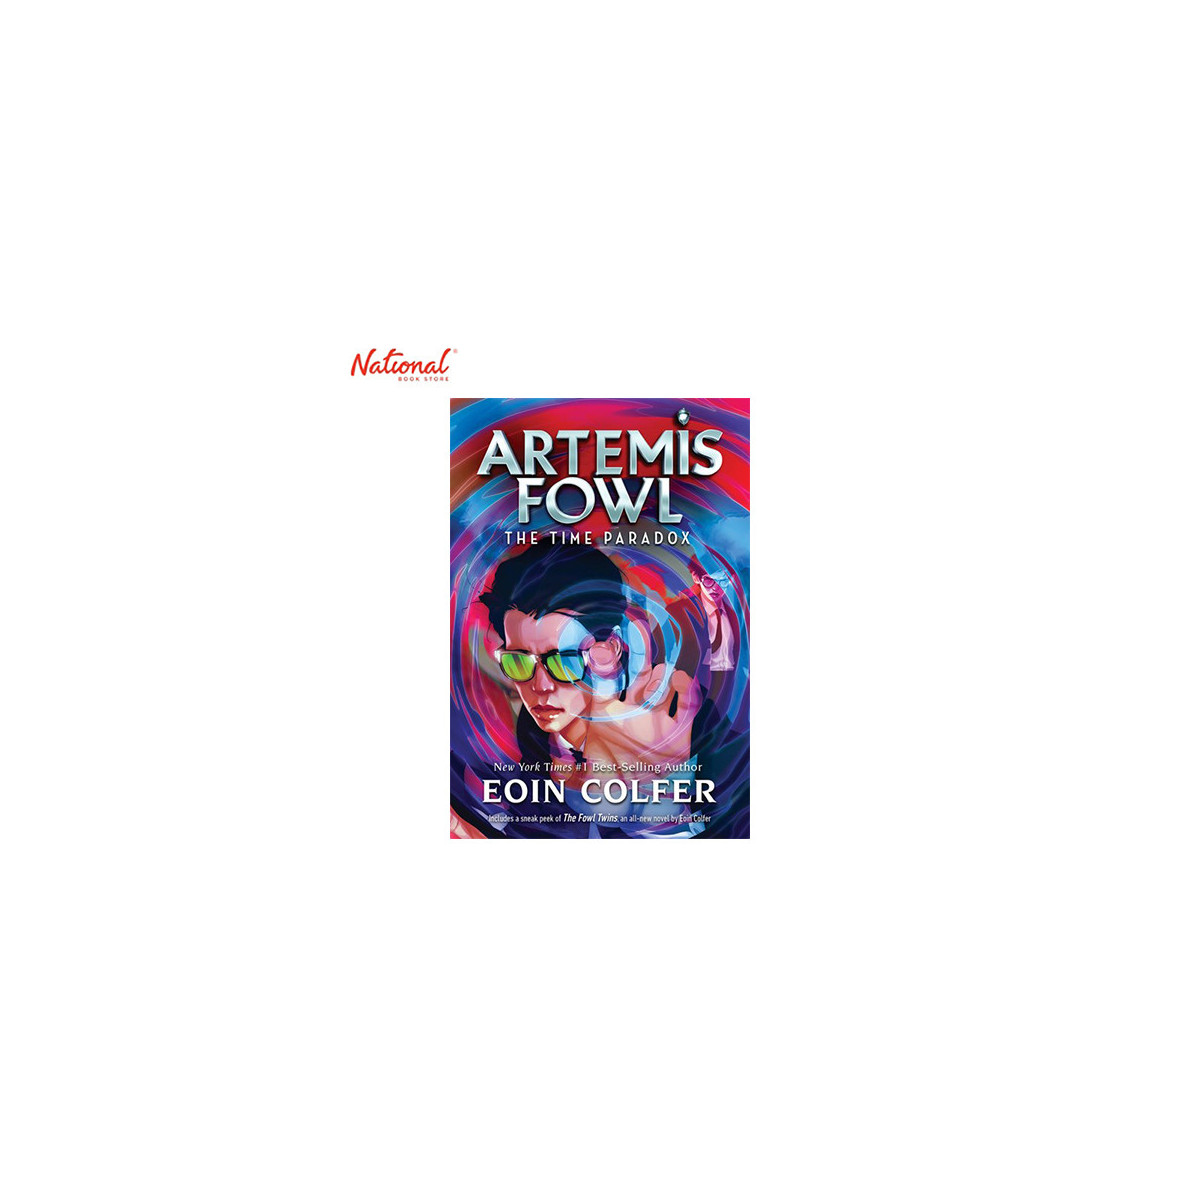 ARTEMIS FOWL THE TIME PARADOX NEW COVER AND SNEAK PEEK TRADE PAPERBACK